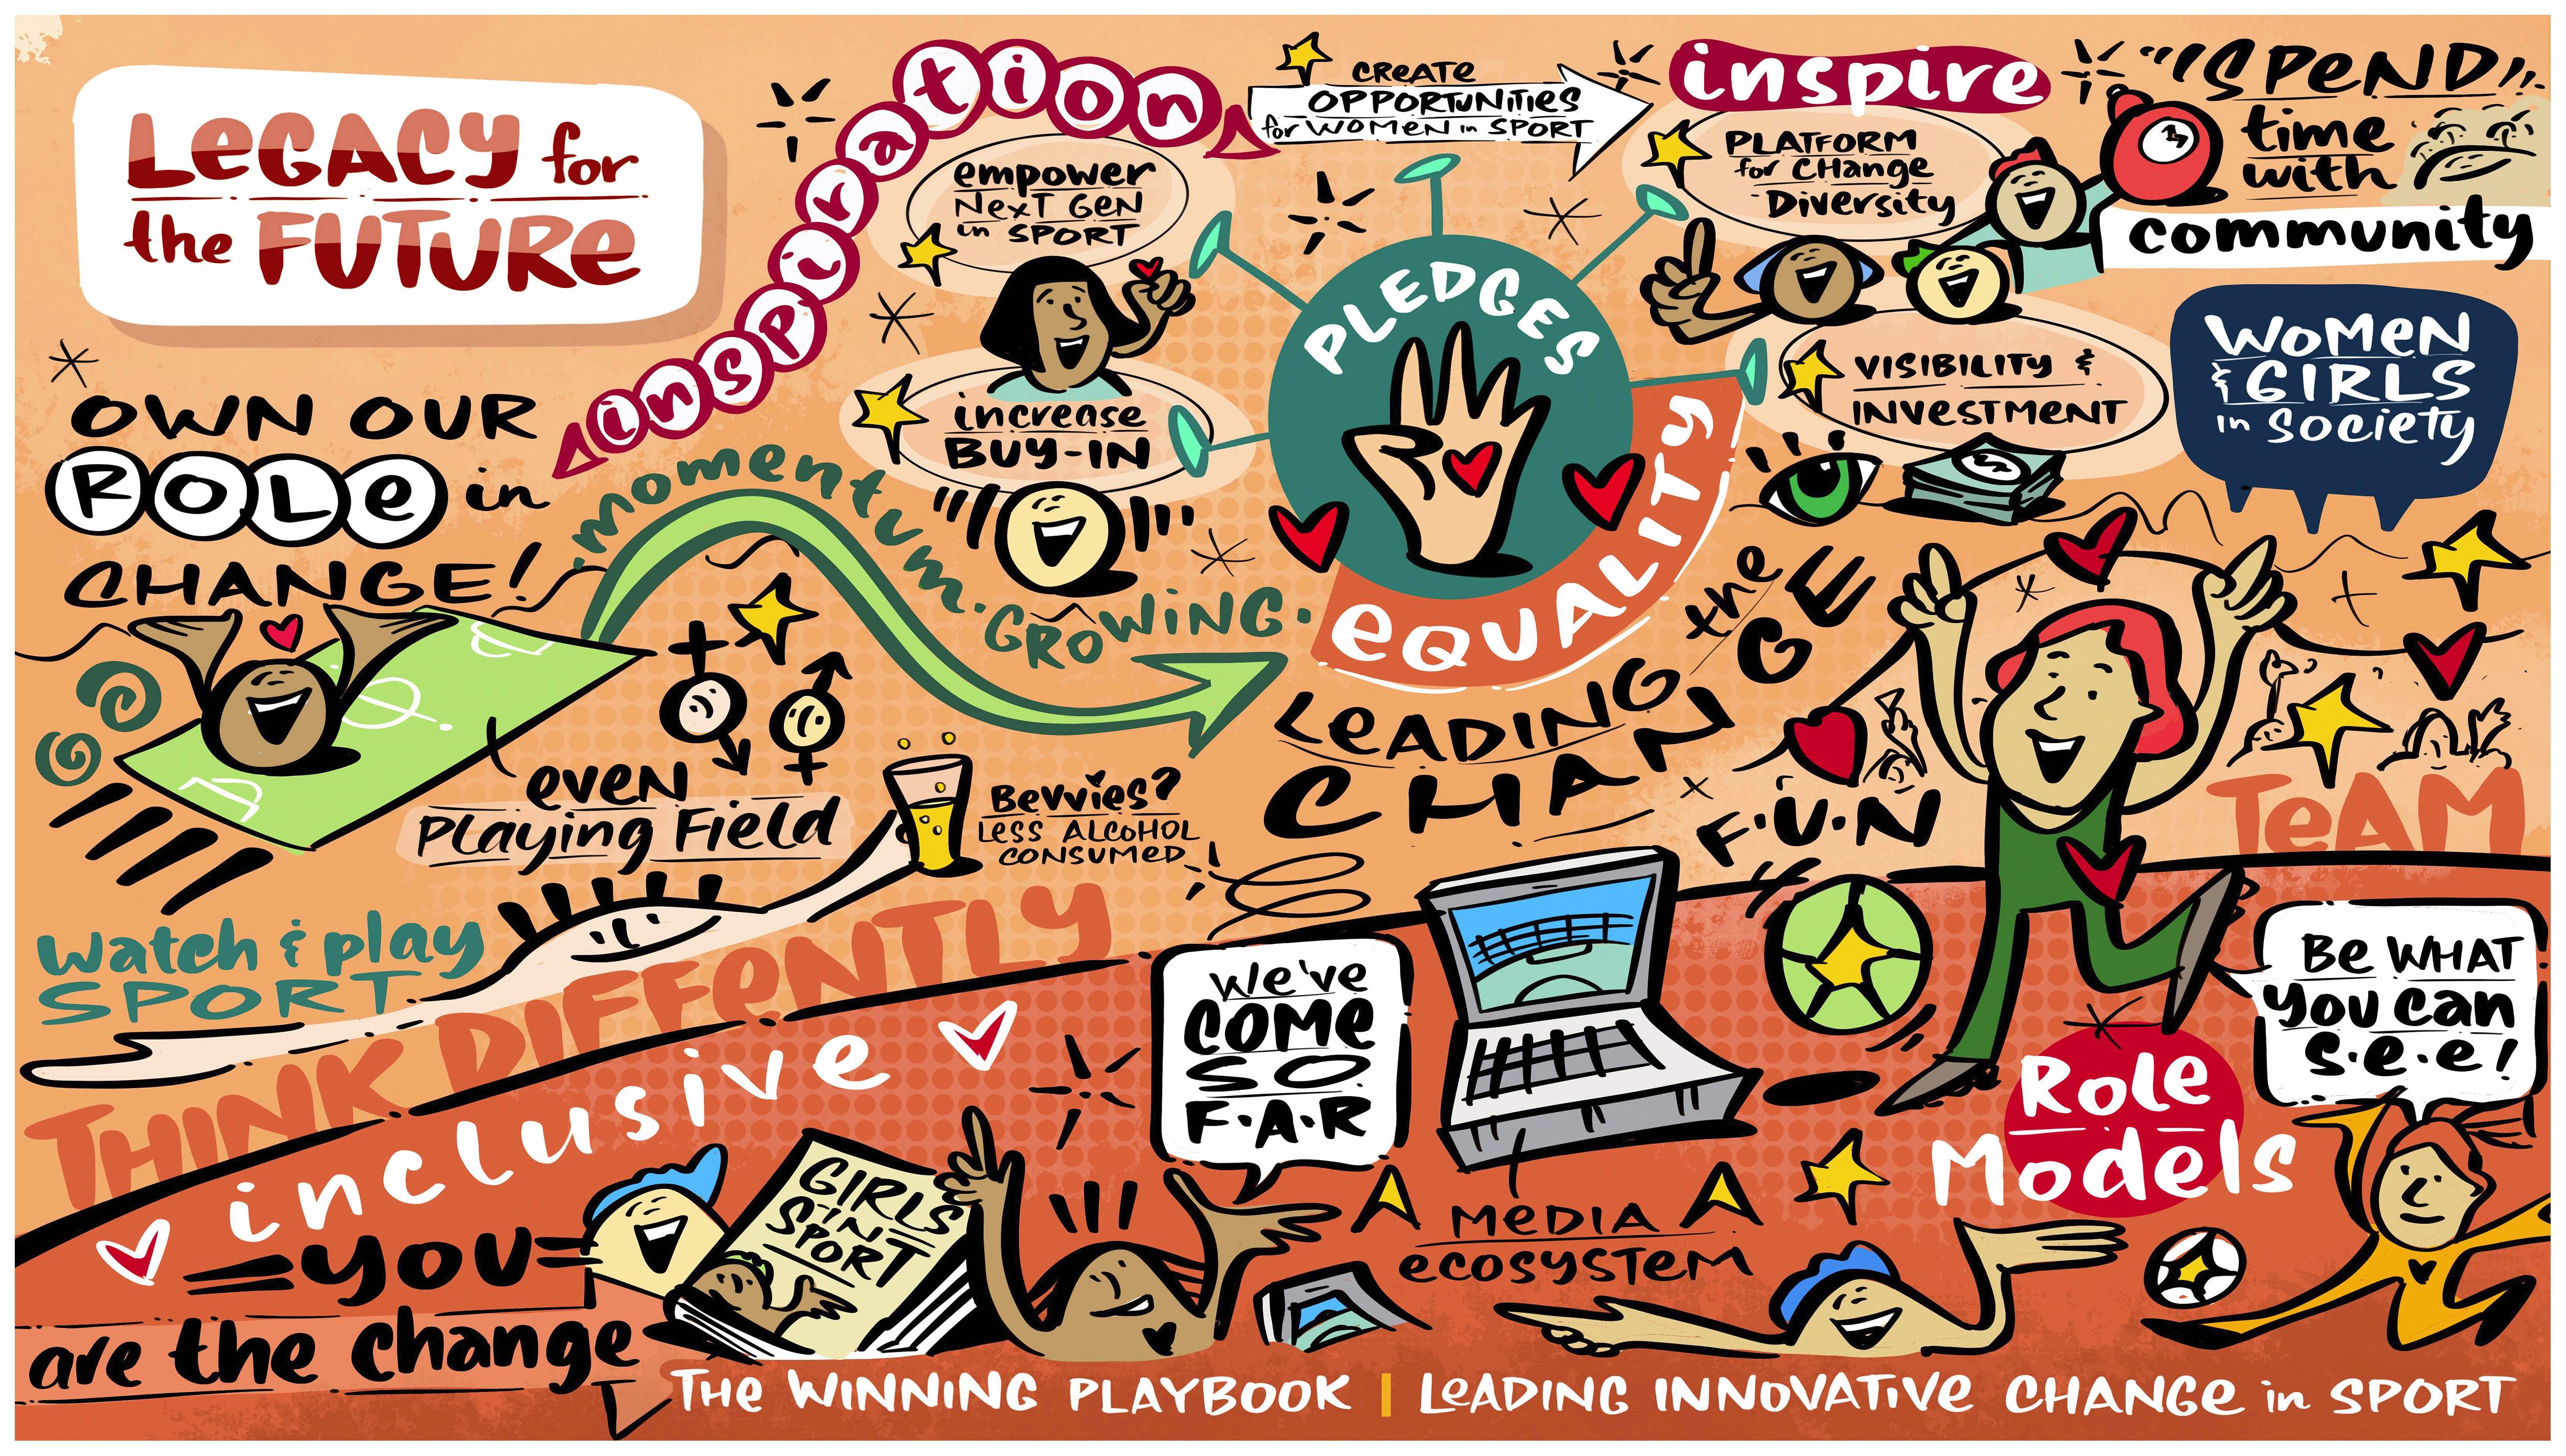 Live visual scribing created by Rachel Dight from Swivel at the event.